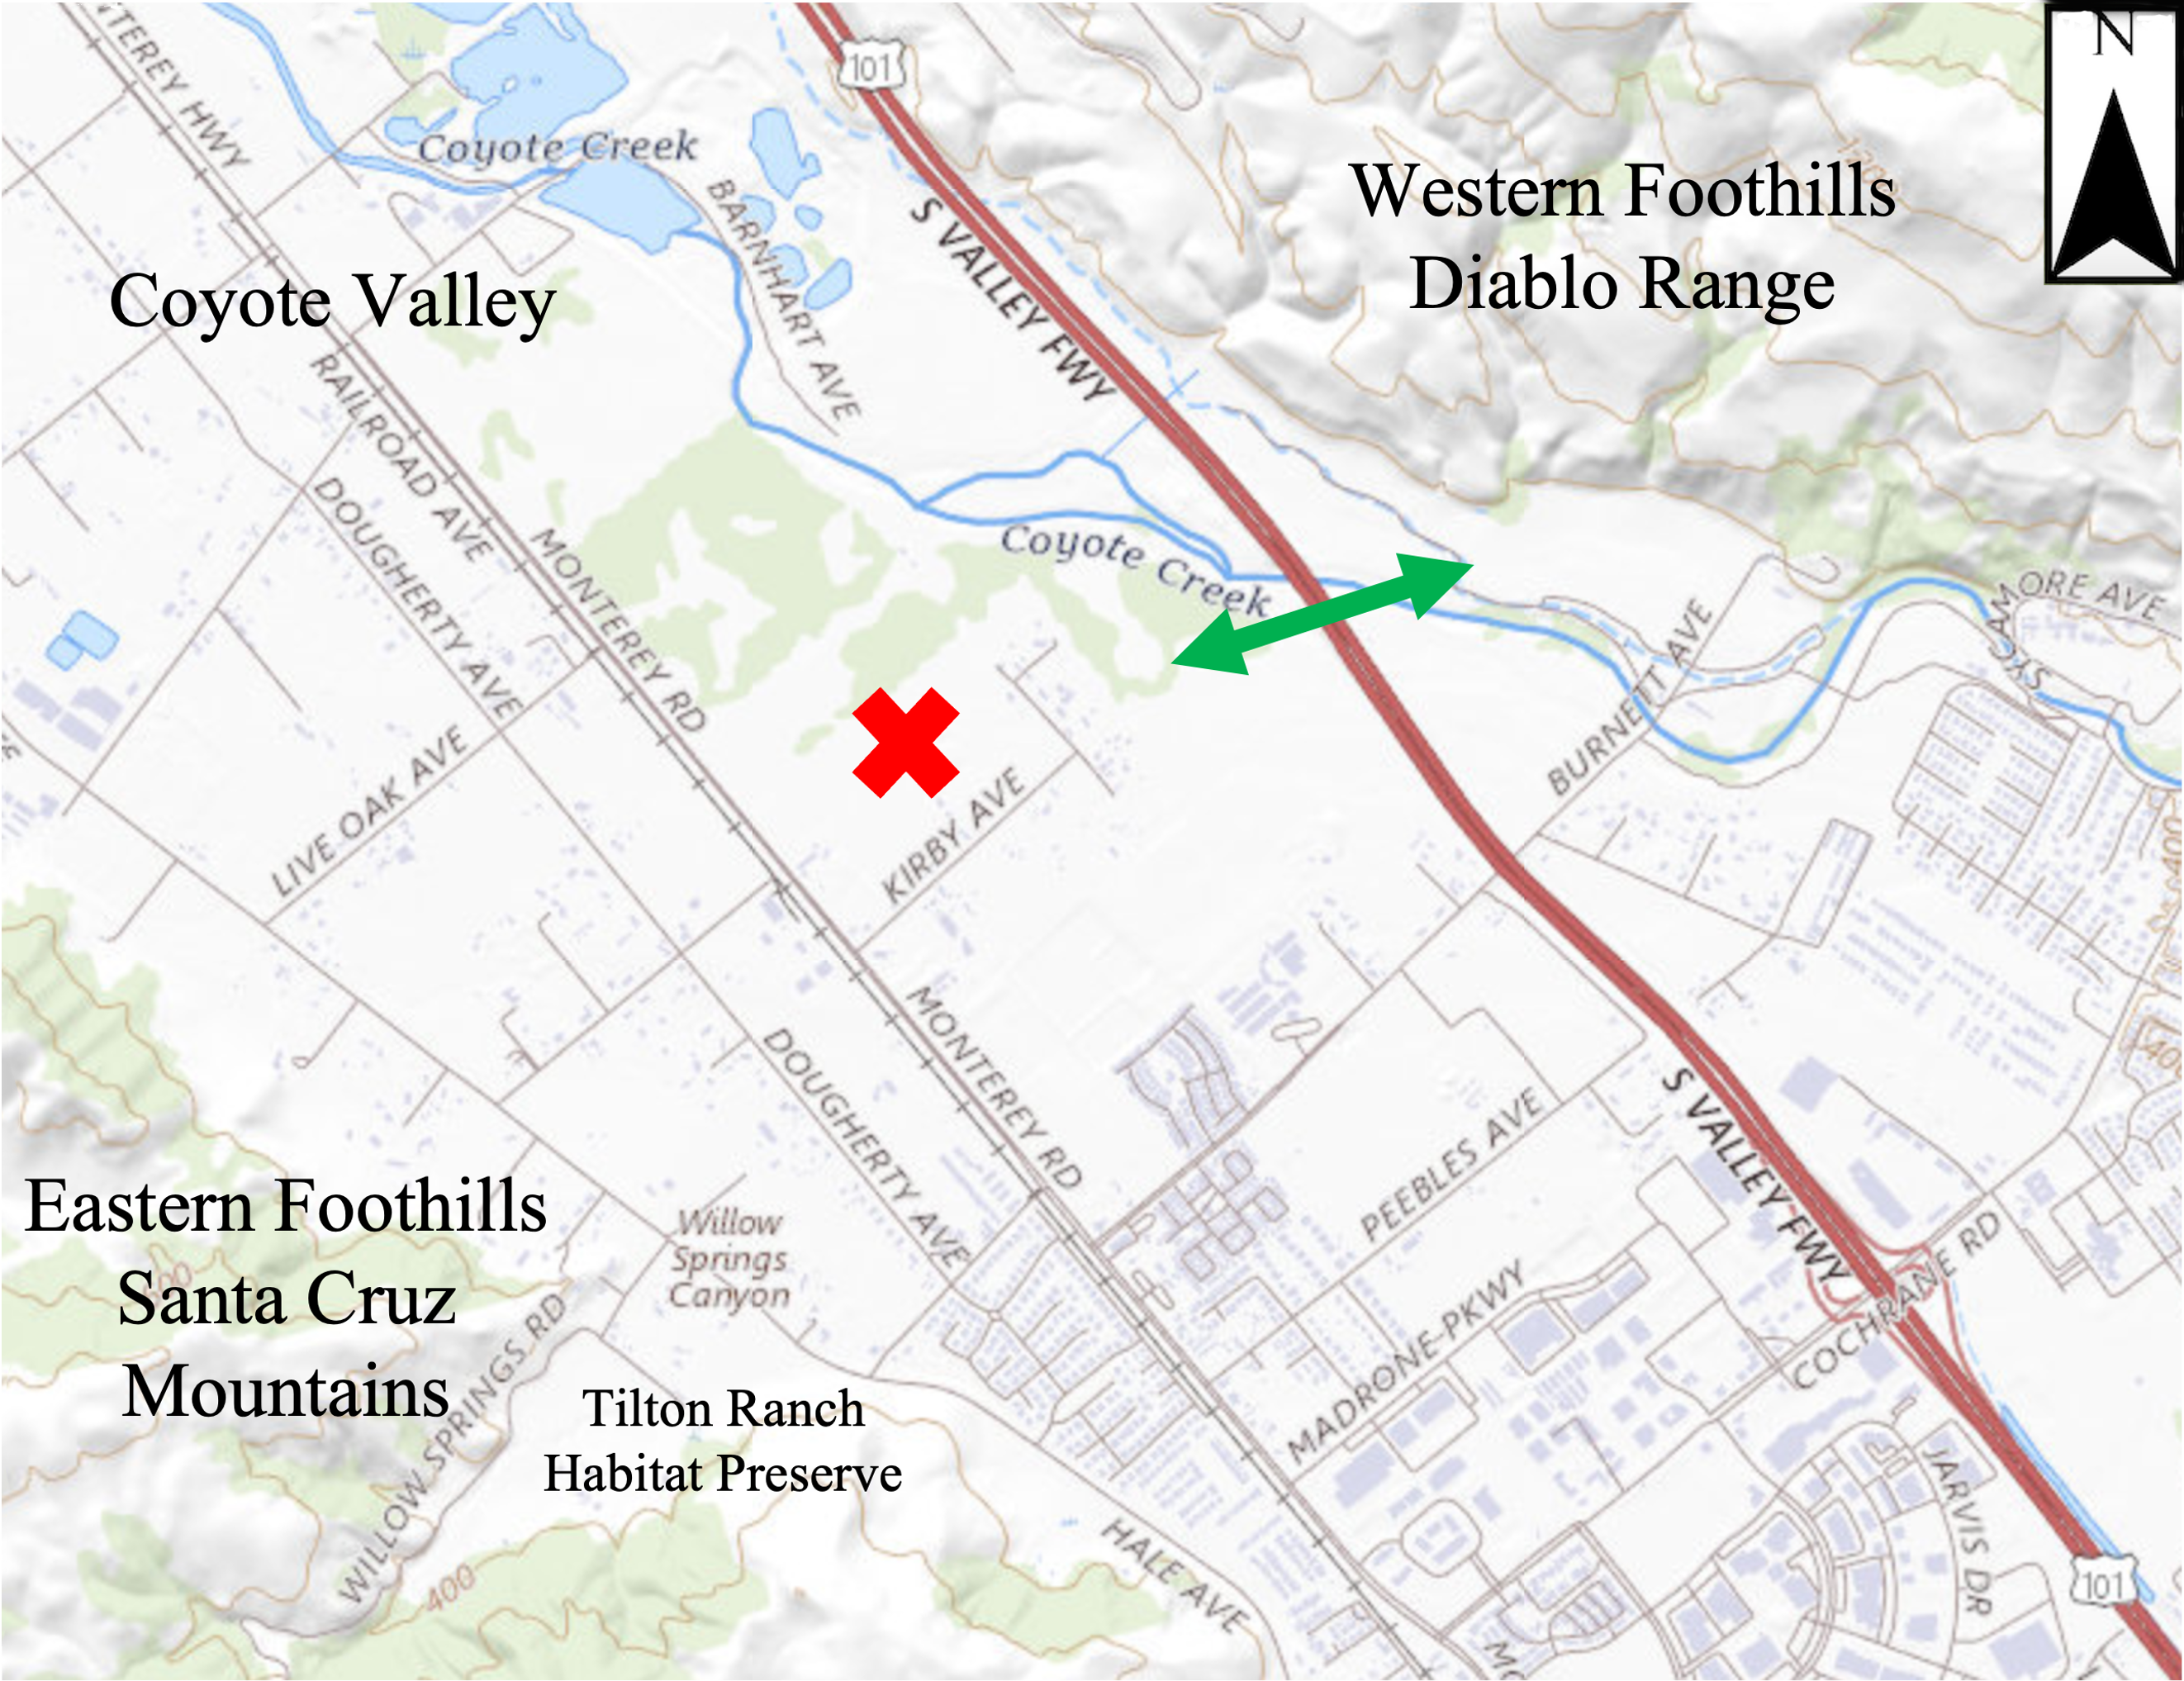 Figure 6. First elk sighting west of U.S. Highway 101 in the study area (marked by red “X”) indicates that elk will use large viaduct undercrossings. Location is 0.5 km west of the large viaduct where Coyote Creek passes beneath the freeway in south Coyote Valley (marked by double-headed green arrow).